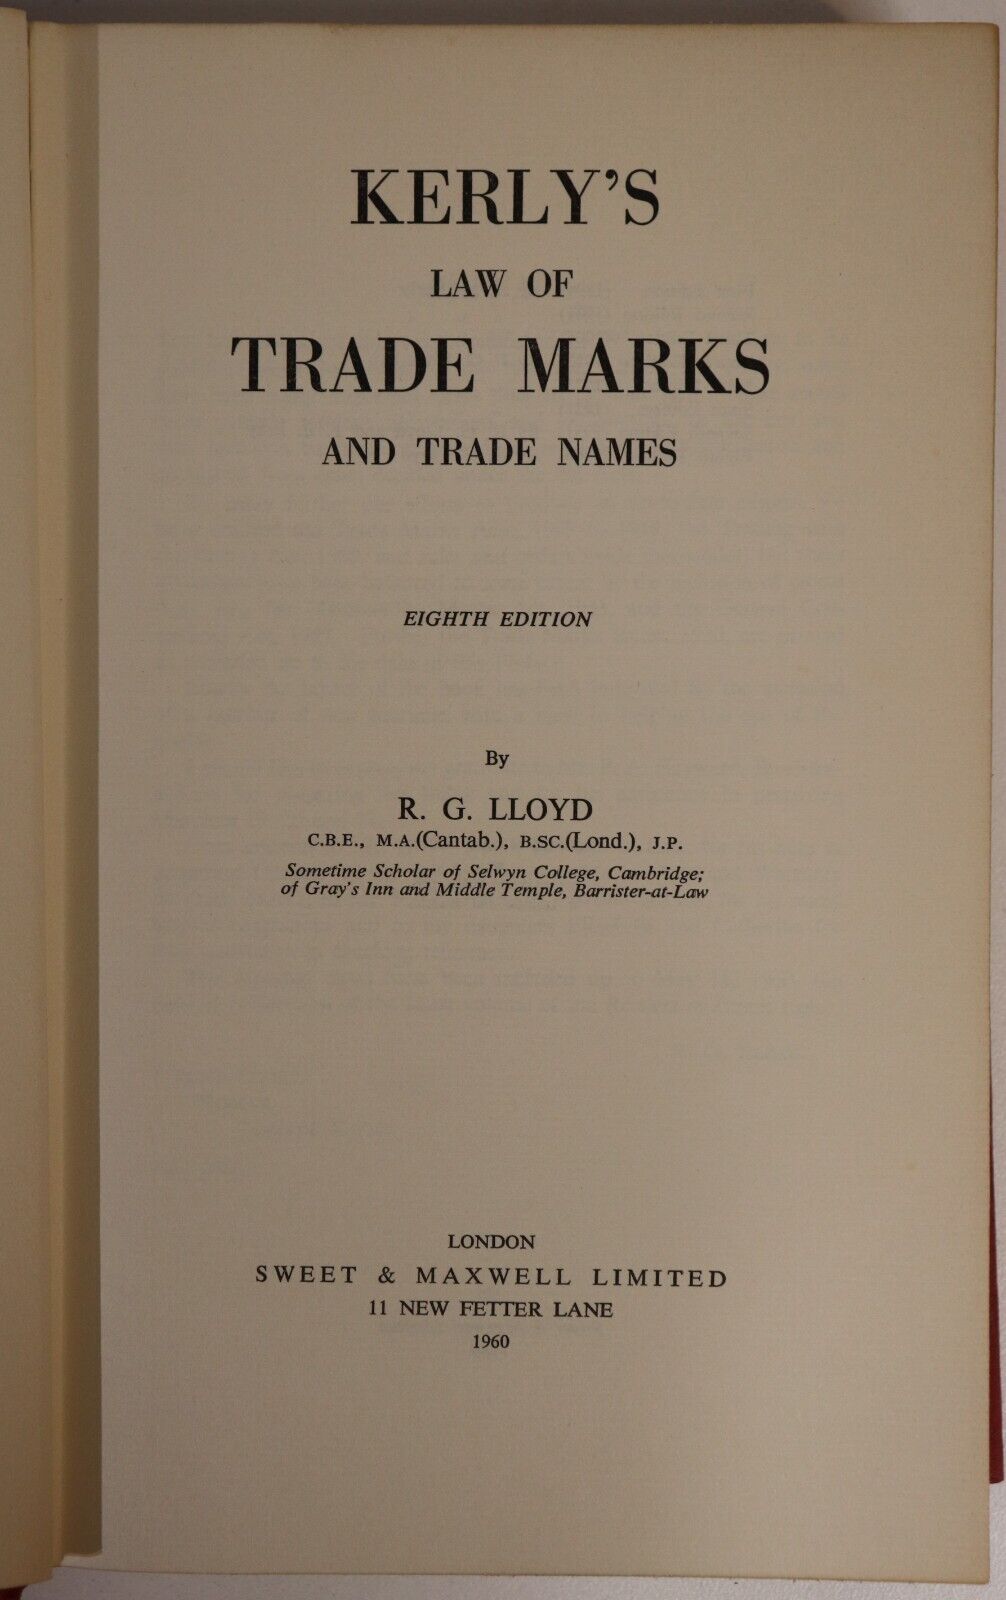 Kerly's Law Of Trade Marks & Trade Names - 1960 - Vintage Legal History Book - 0